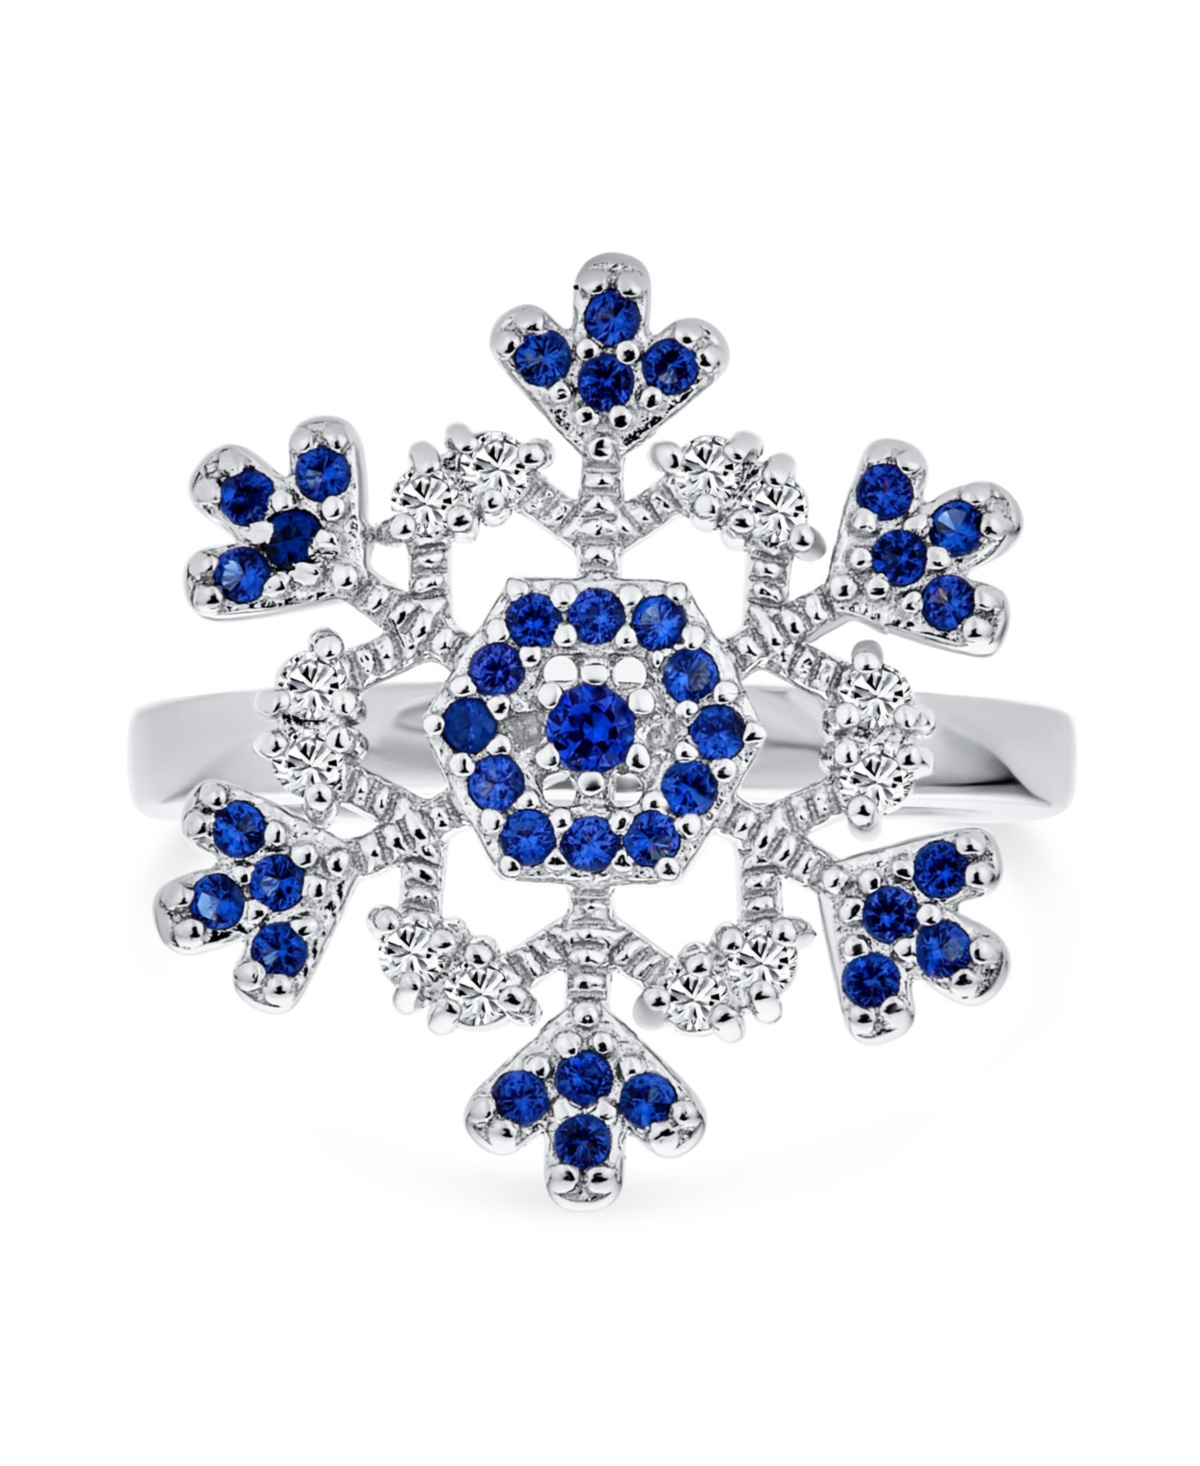 BLING JEWELRY WINTER HOLIDAY CHRISTMAS STATEMENT 2 TONE BLUE CLEAR CUBIC ZIRCONIA FLOWER SNOWFLAKE CZ RING COCKTAI